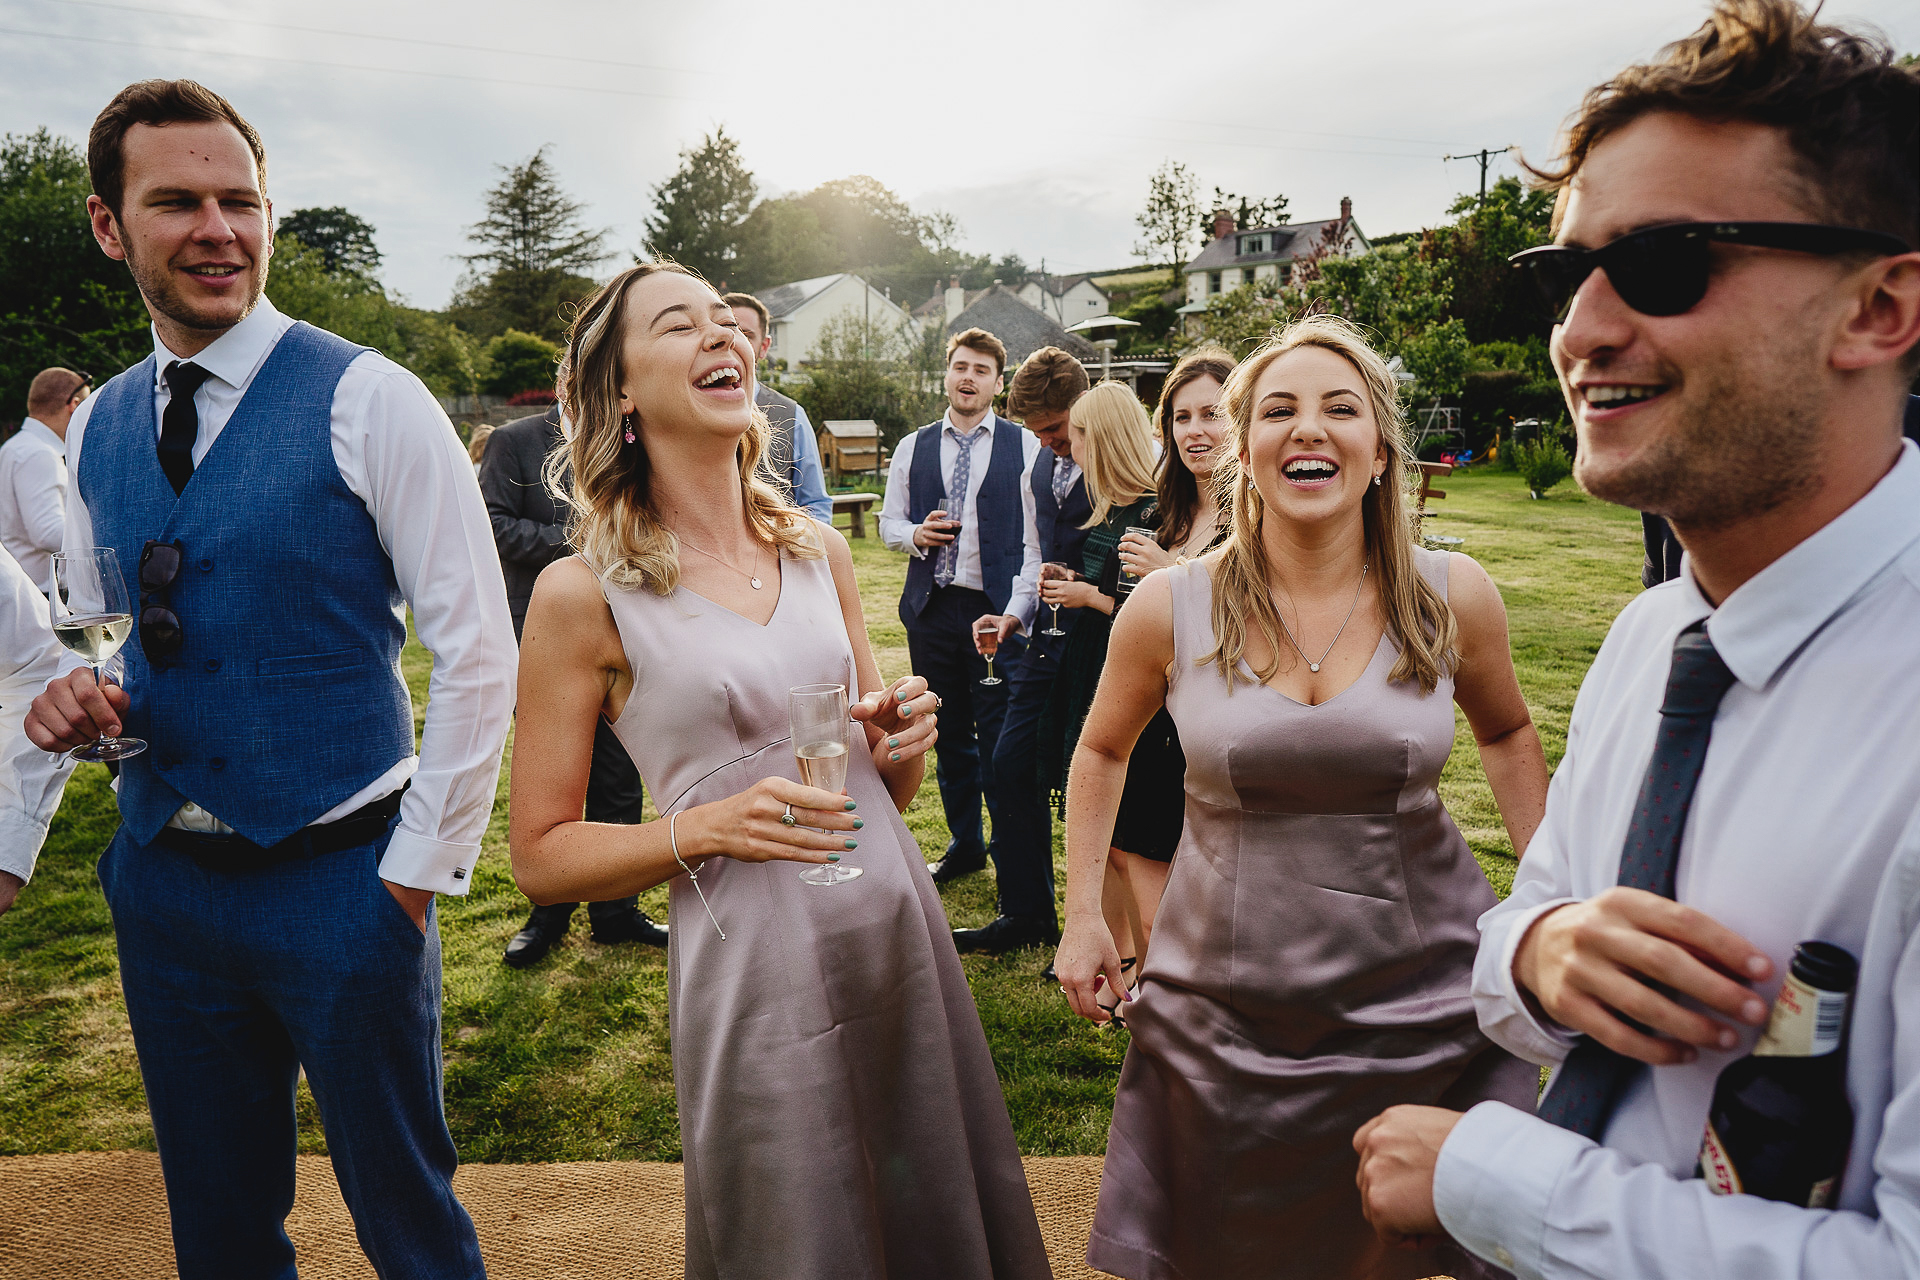 Bridesmaids and wedding guests laughing in a field